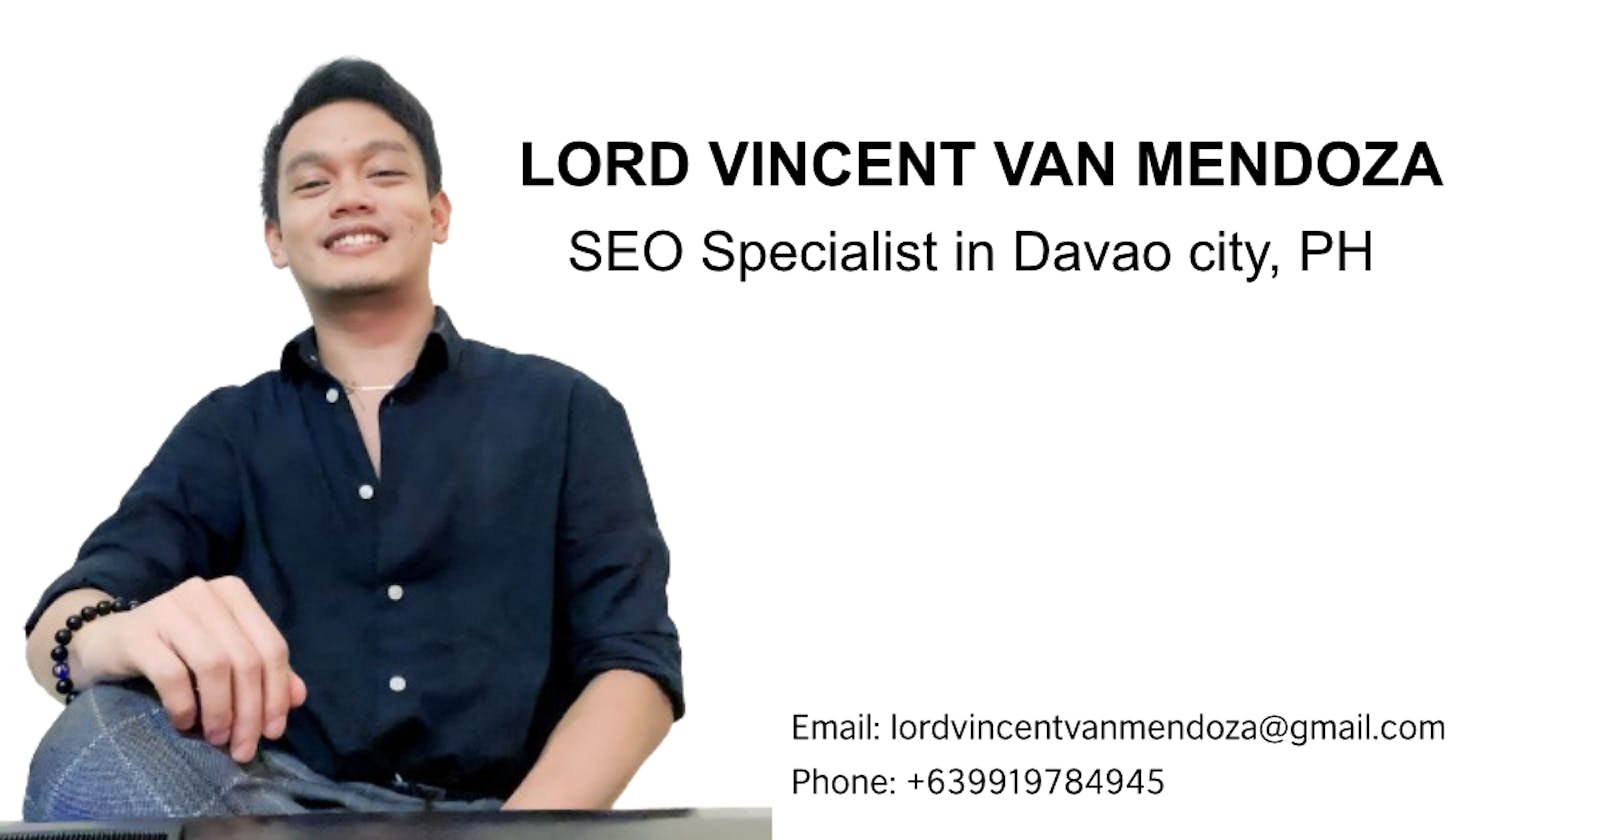 Why hire Digital Lourd as your SEO specialist in Davao